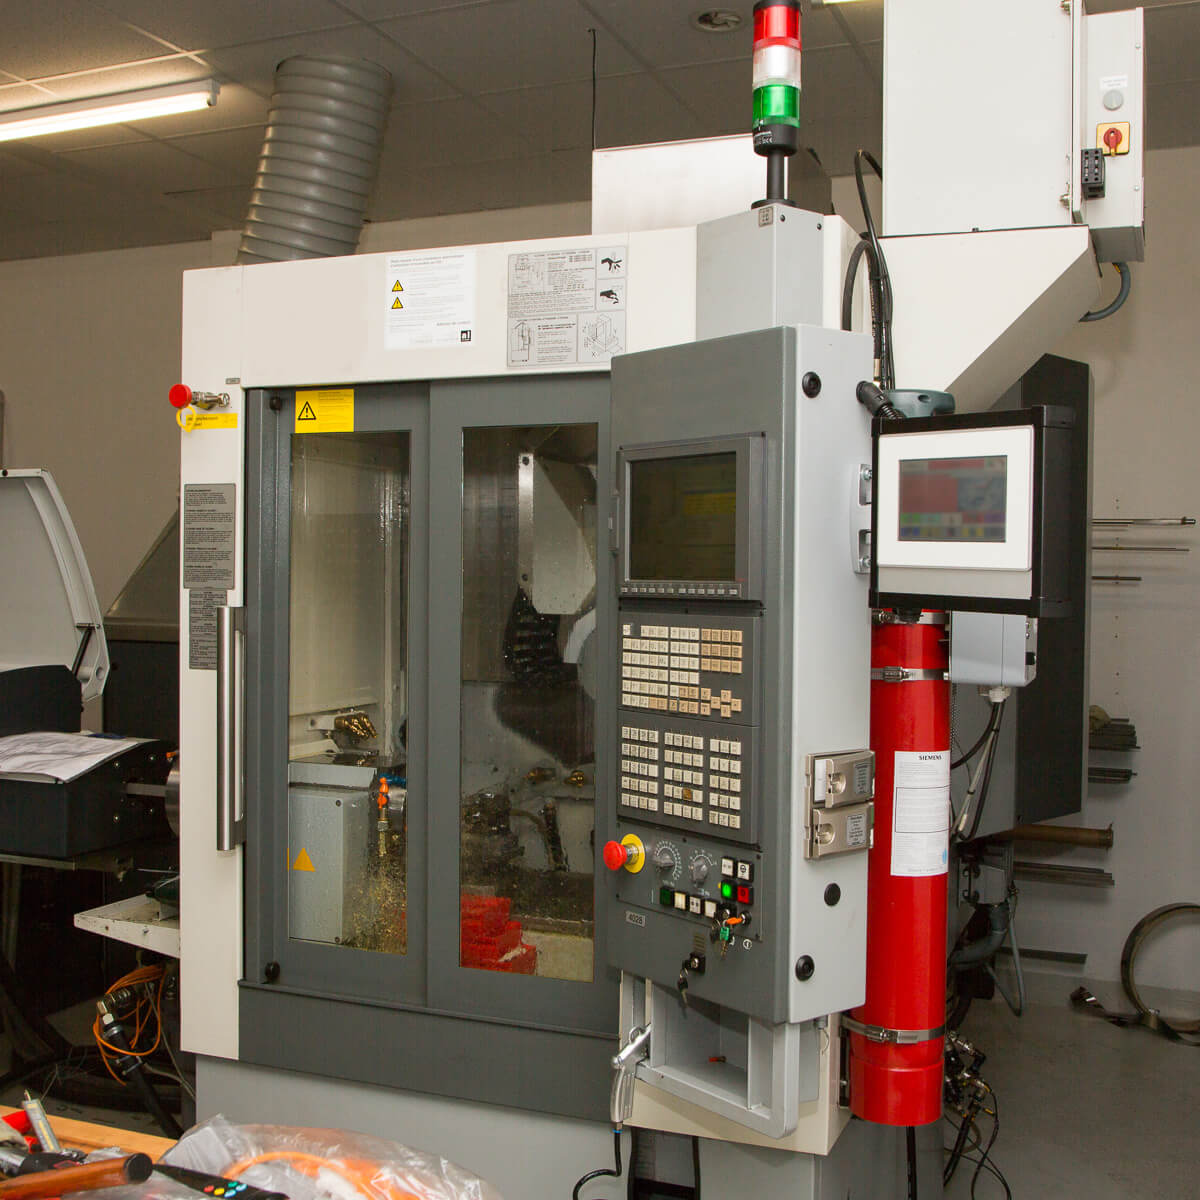 A five-axis CNC machine at the Valbray manufacture